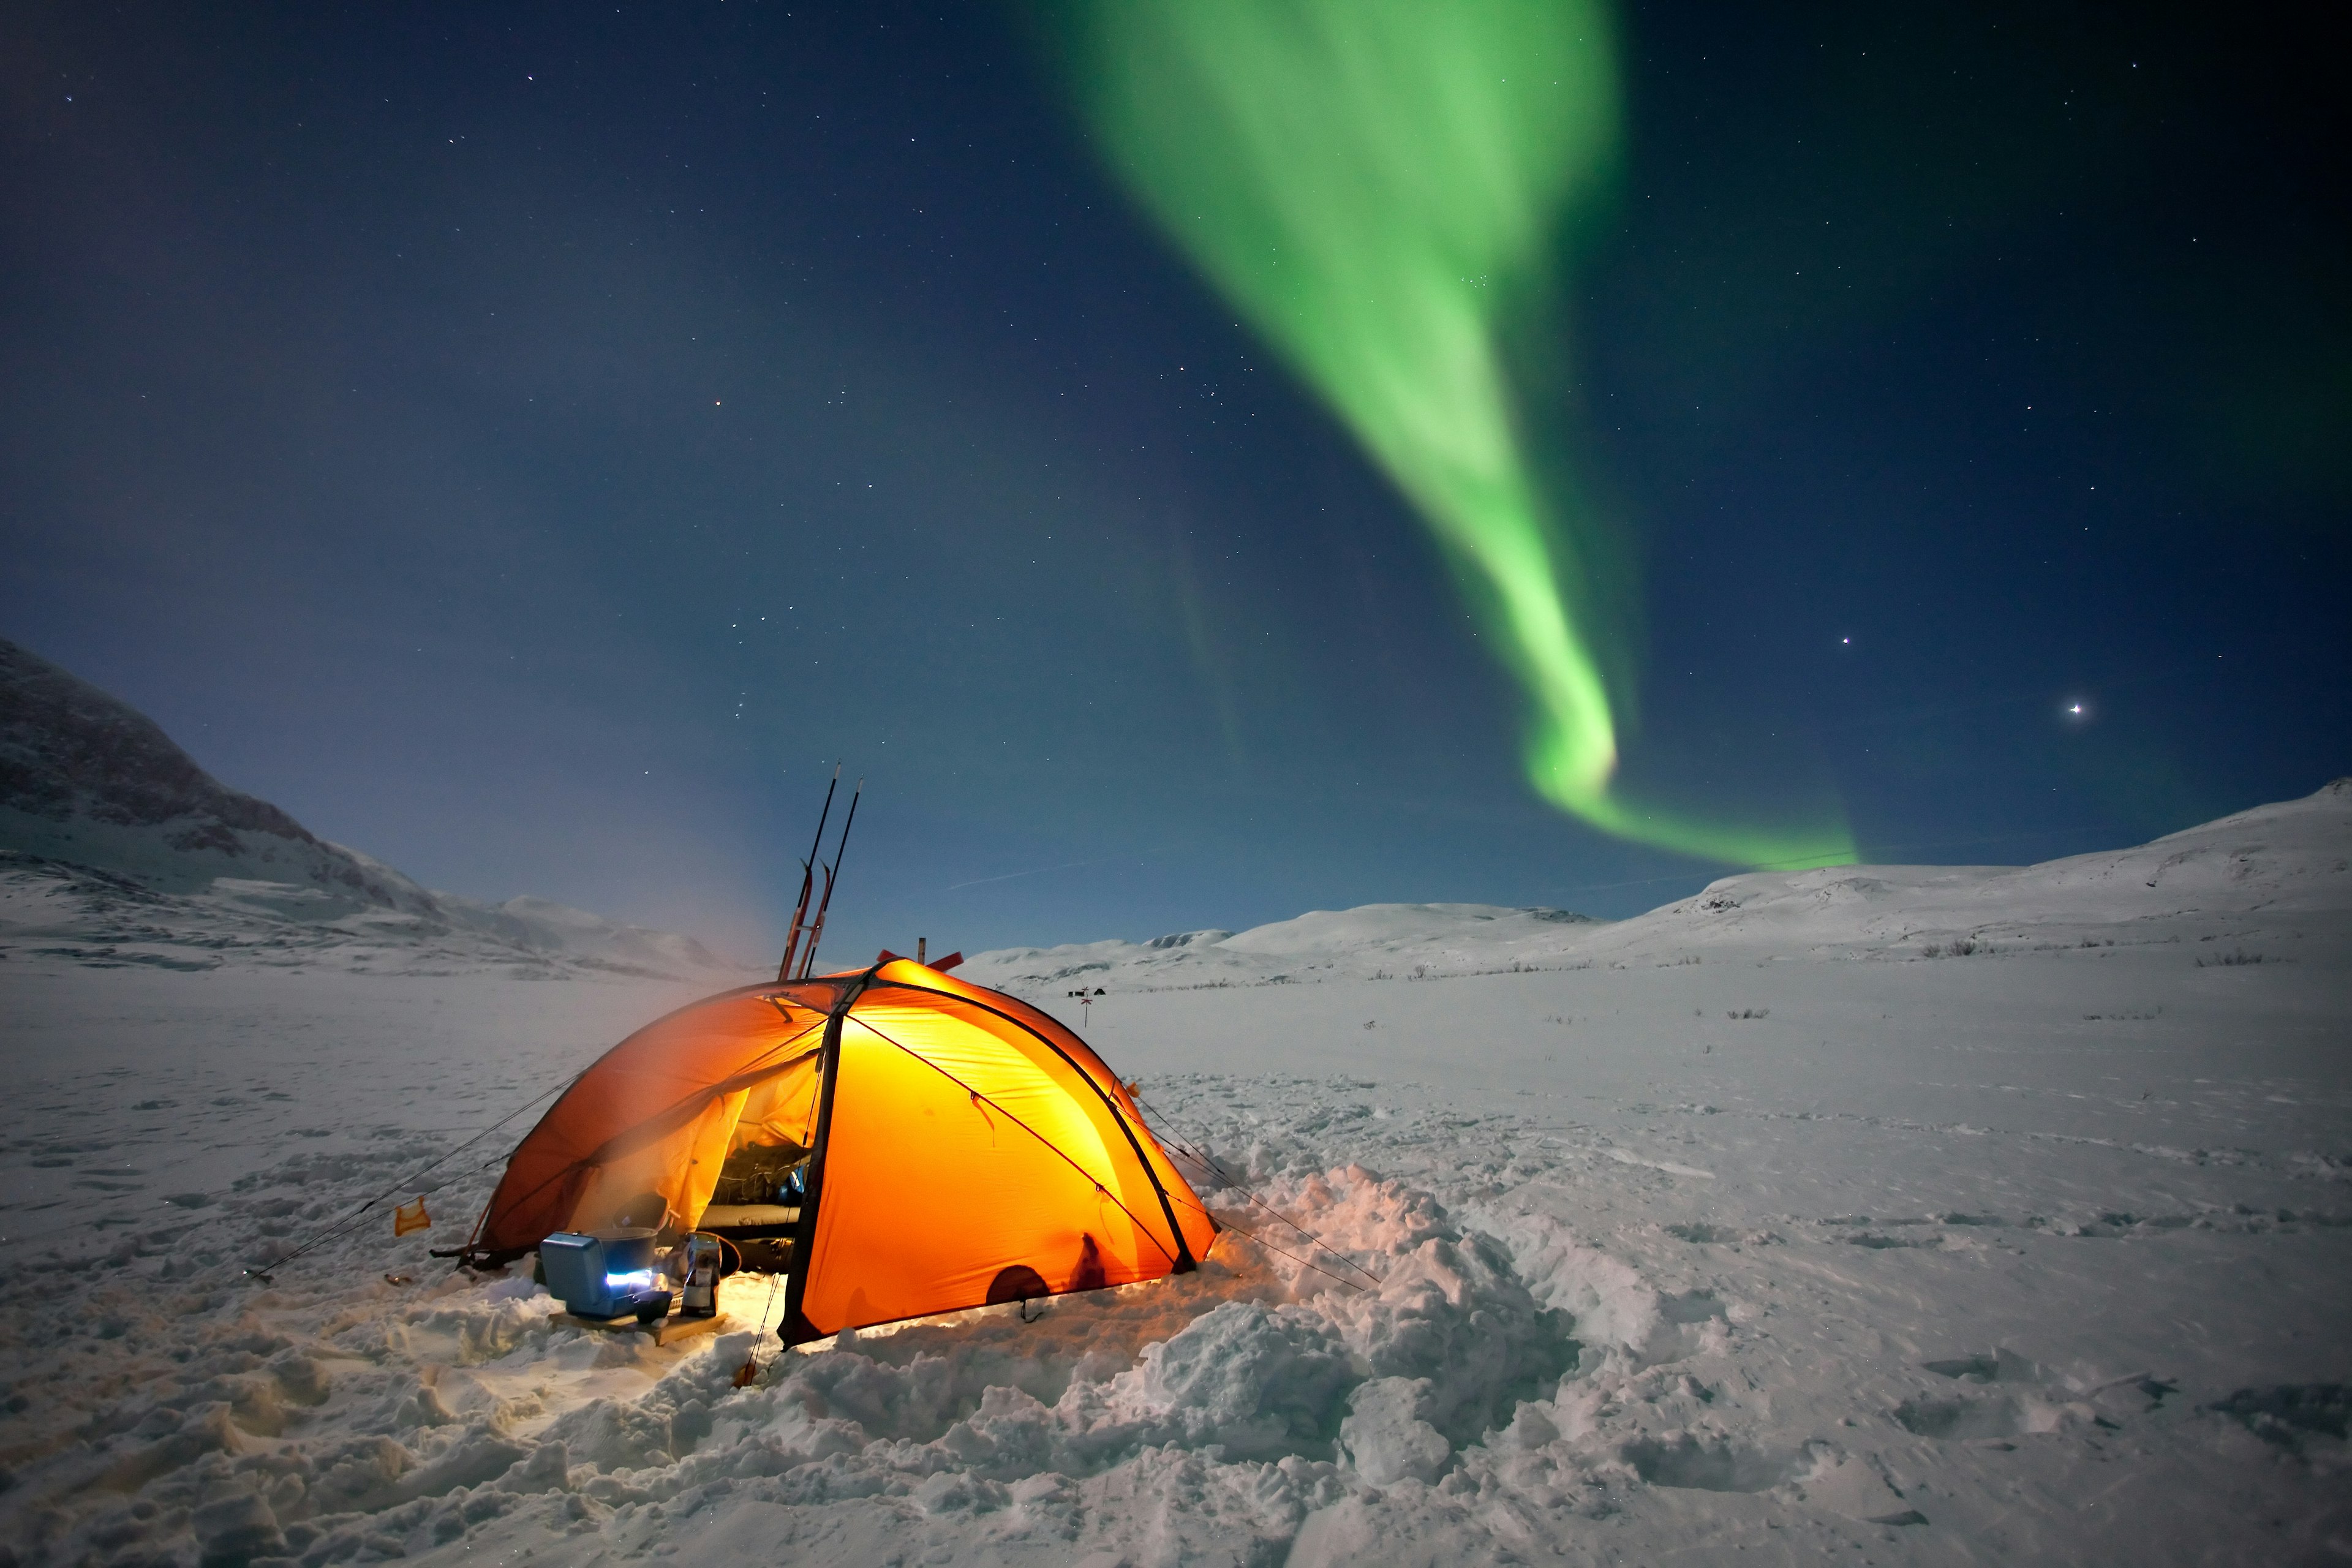 A tent in a snowy field illuminated at night under the Northern Lights.